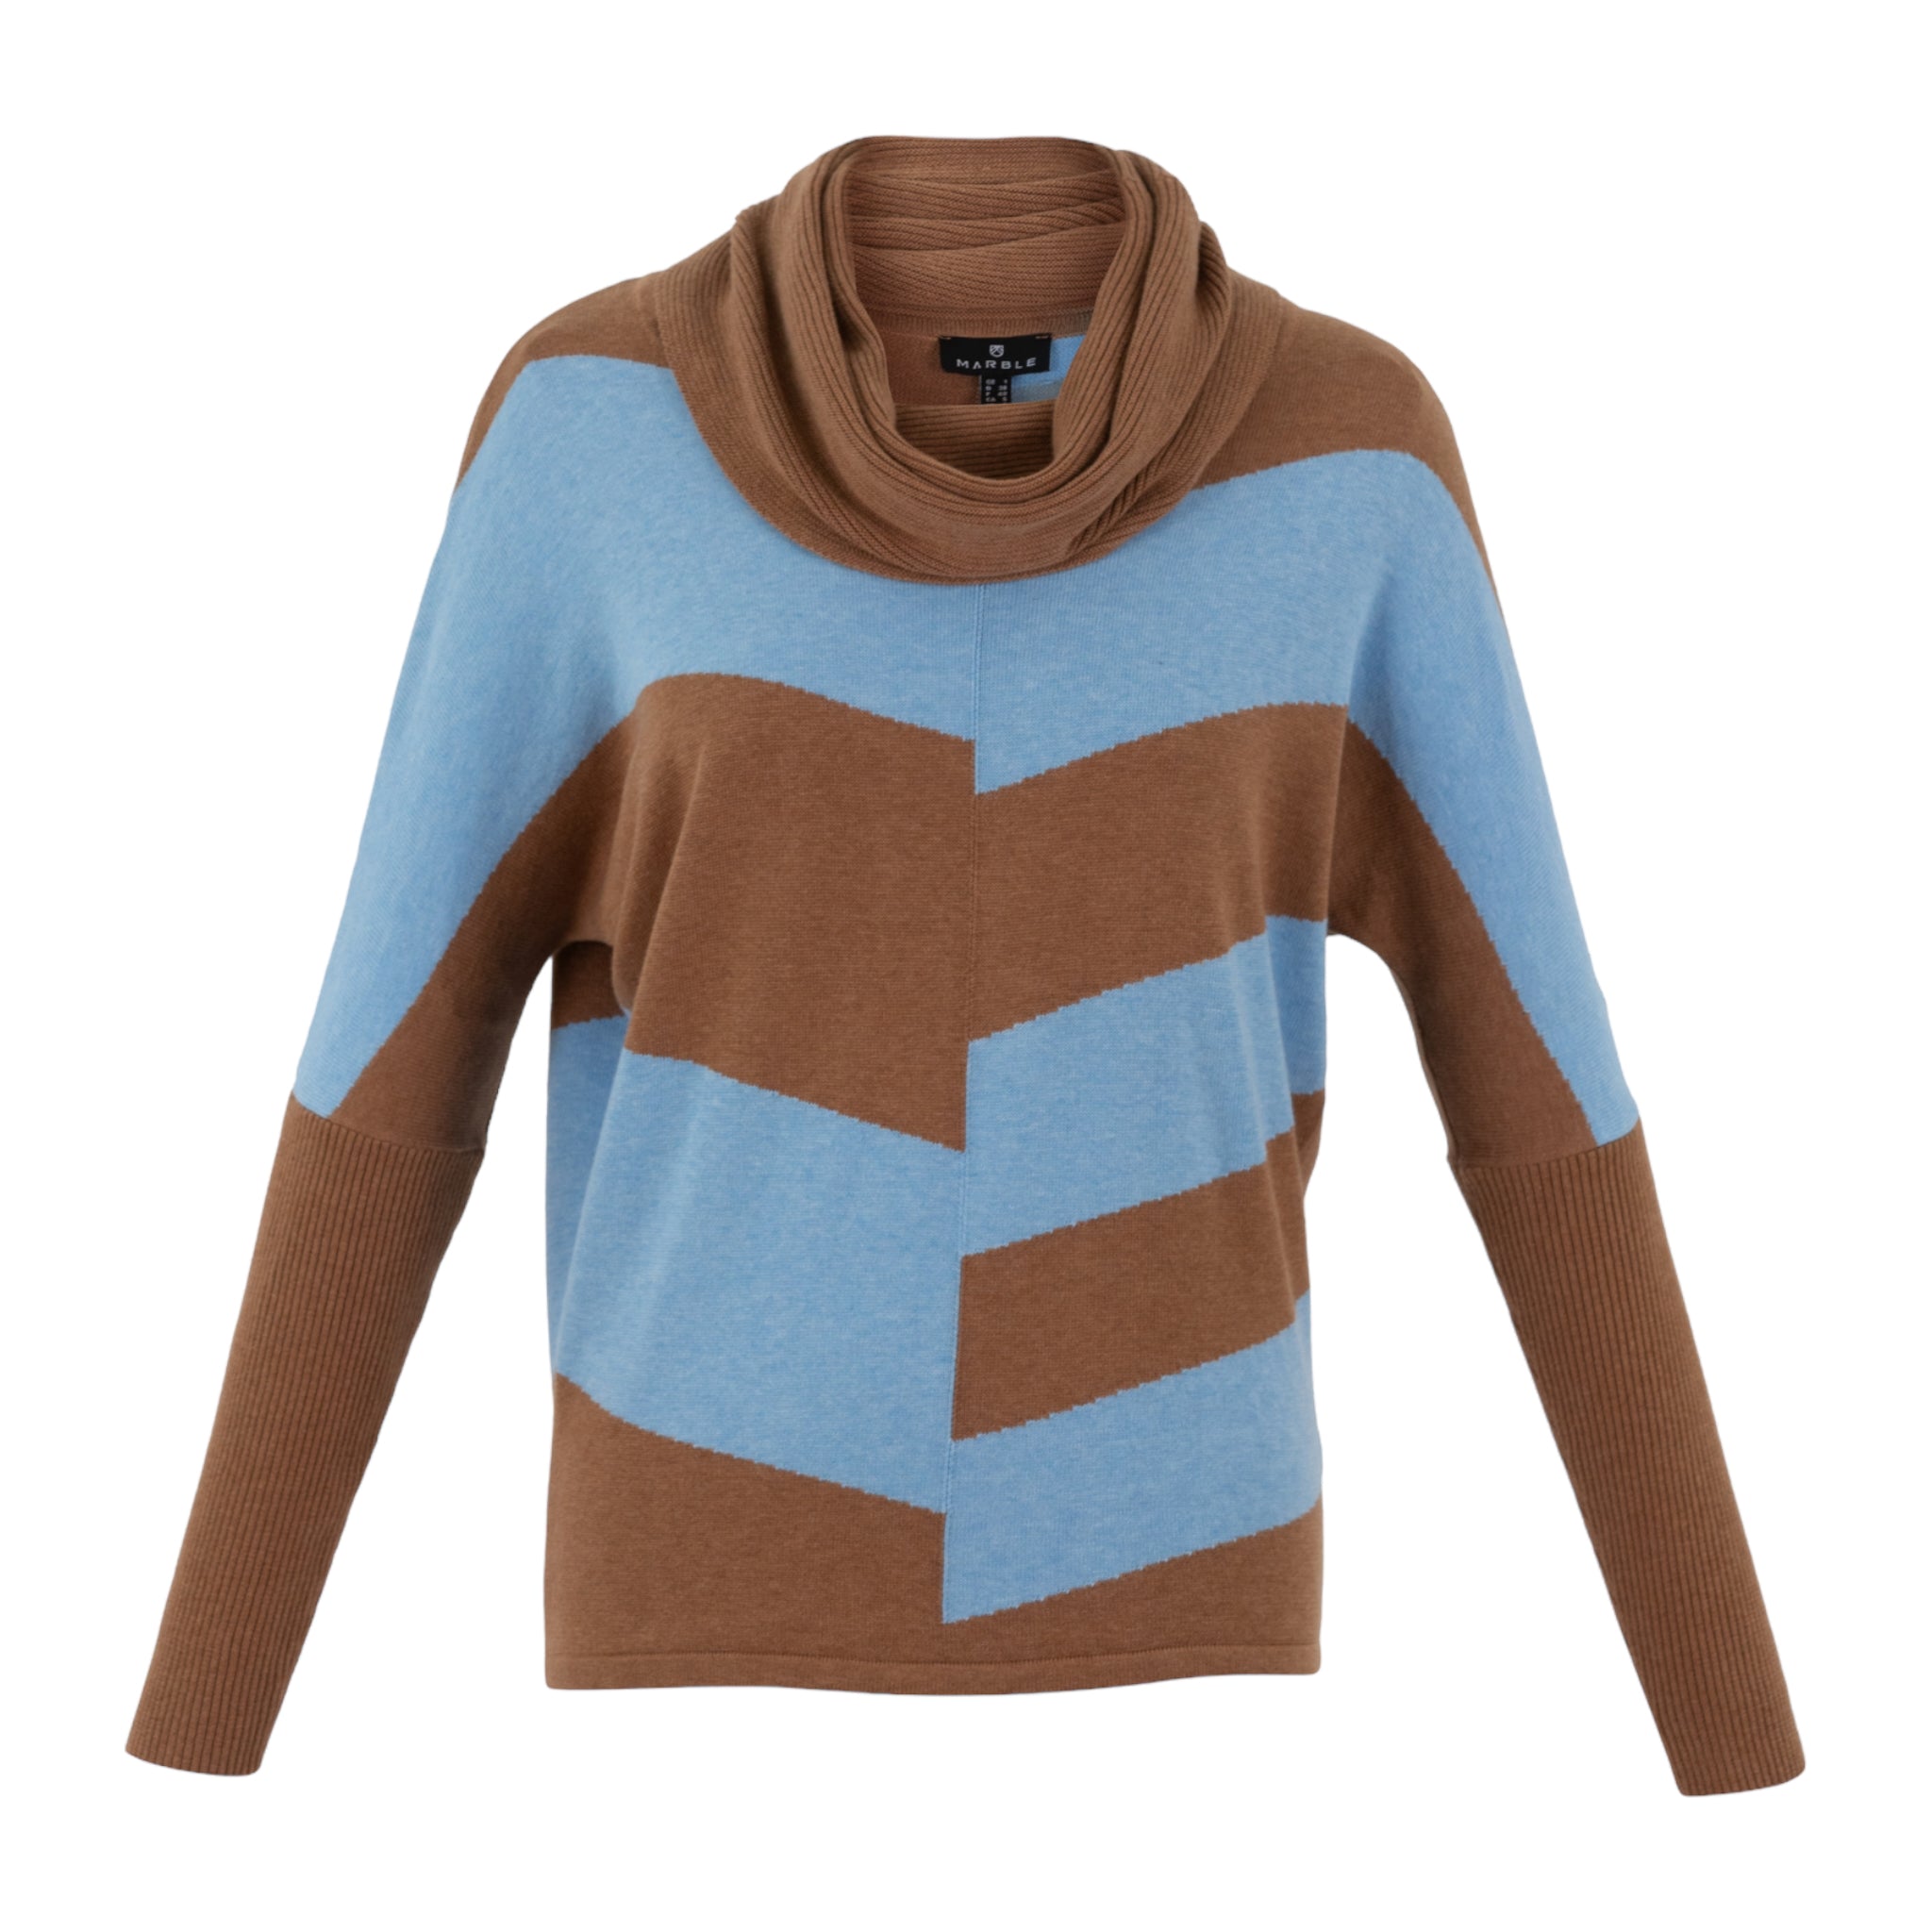 Marble-Striped-Sweater-Powder-Blue-and-Tobacco-Product-Image-Front-View